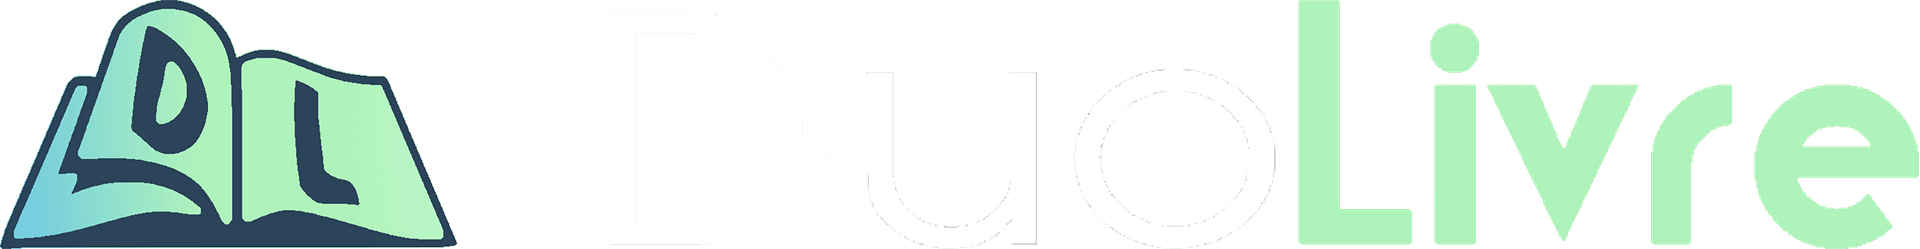 DuoLivre Logo (An open book with a 'D' on the left and an 'L' on the right followed by stylized text with the company name, 'DuoLivre'